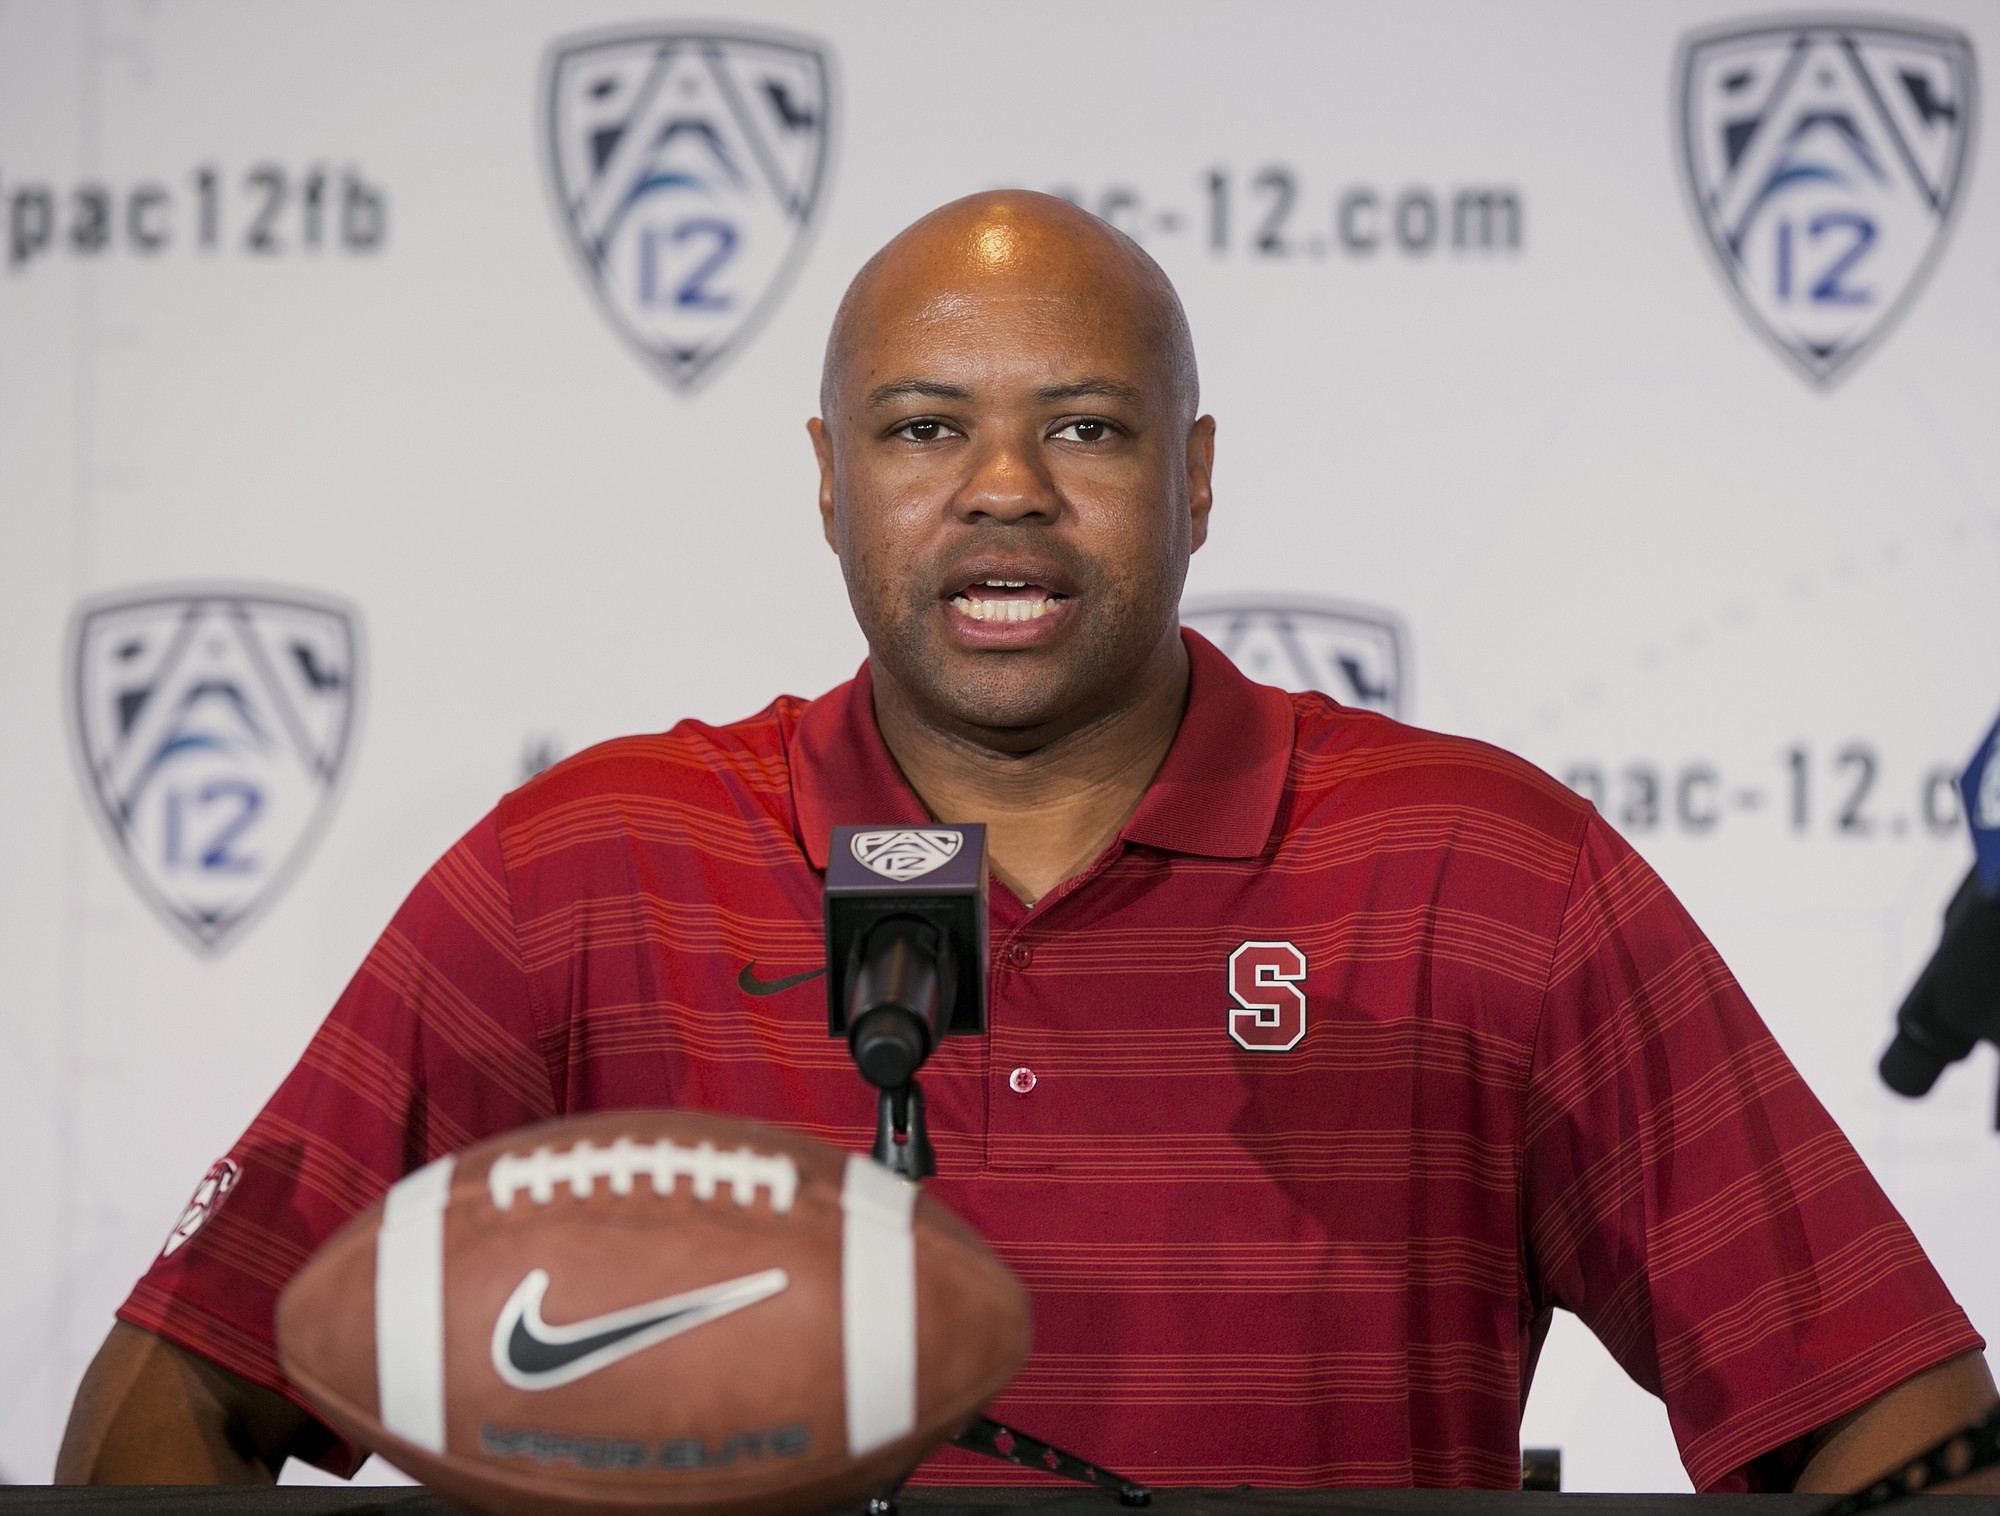 Stanford head coach David Shaw said he won't use a media poll as motivation for his team.